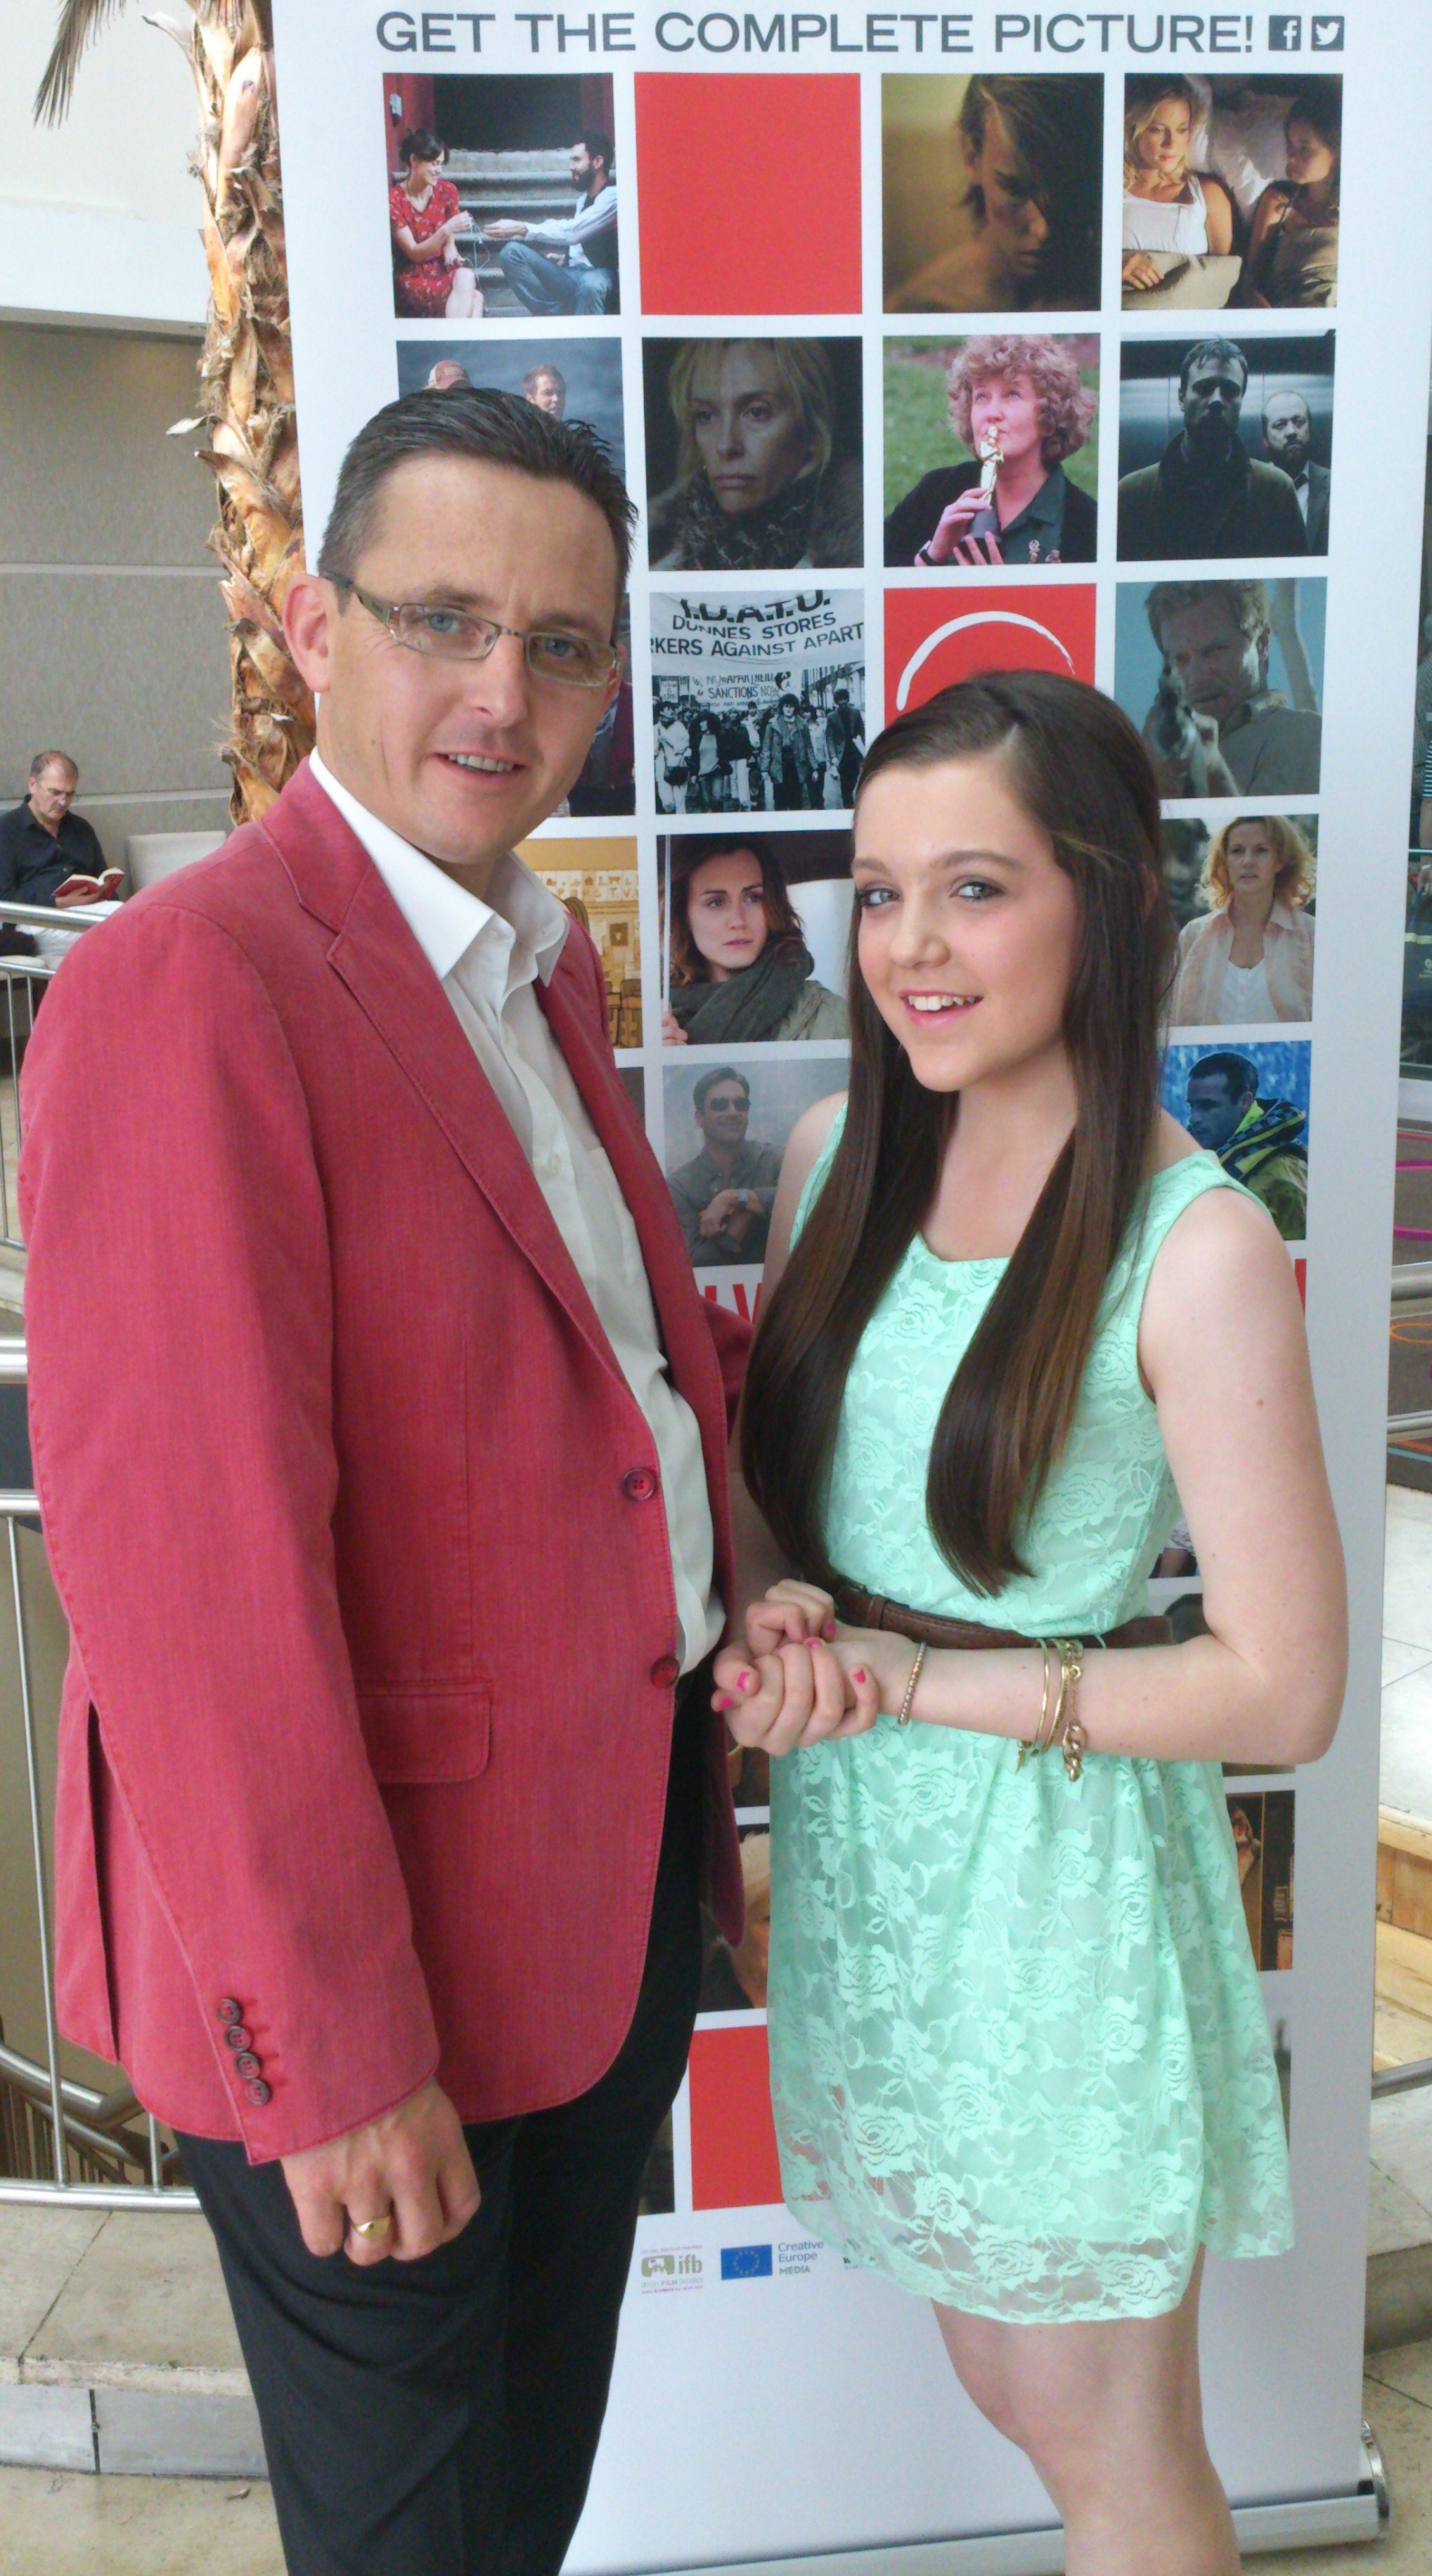 Stephen Gibson and actress Chloe Gibson @ 2014 Galway Film Fleadh